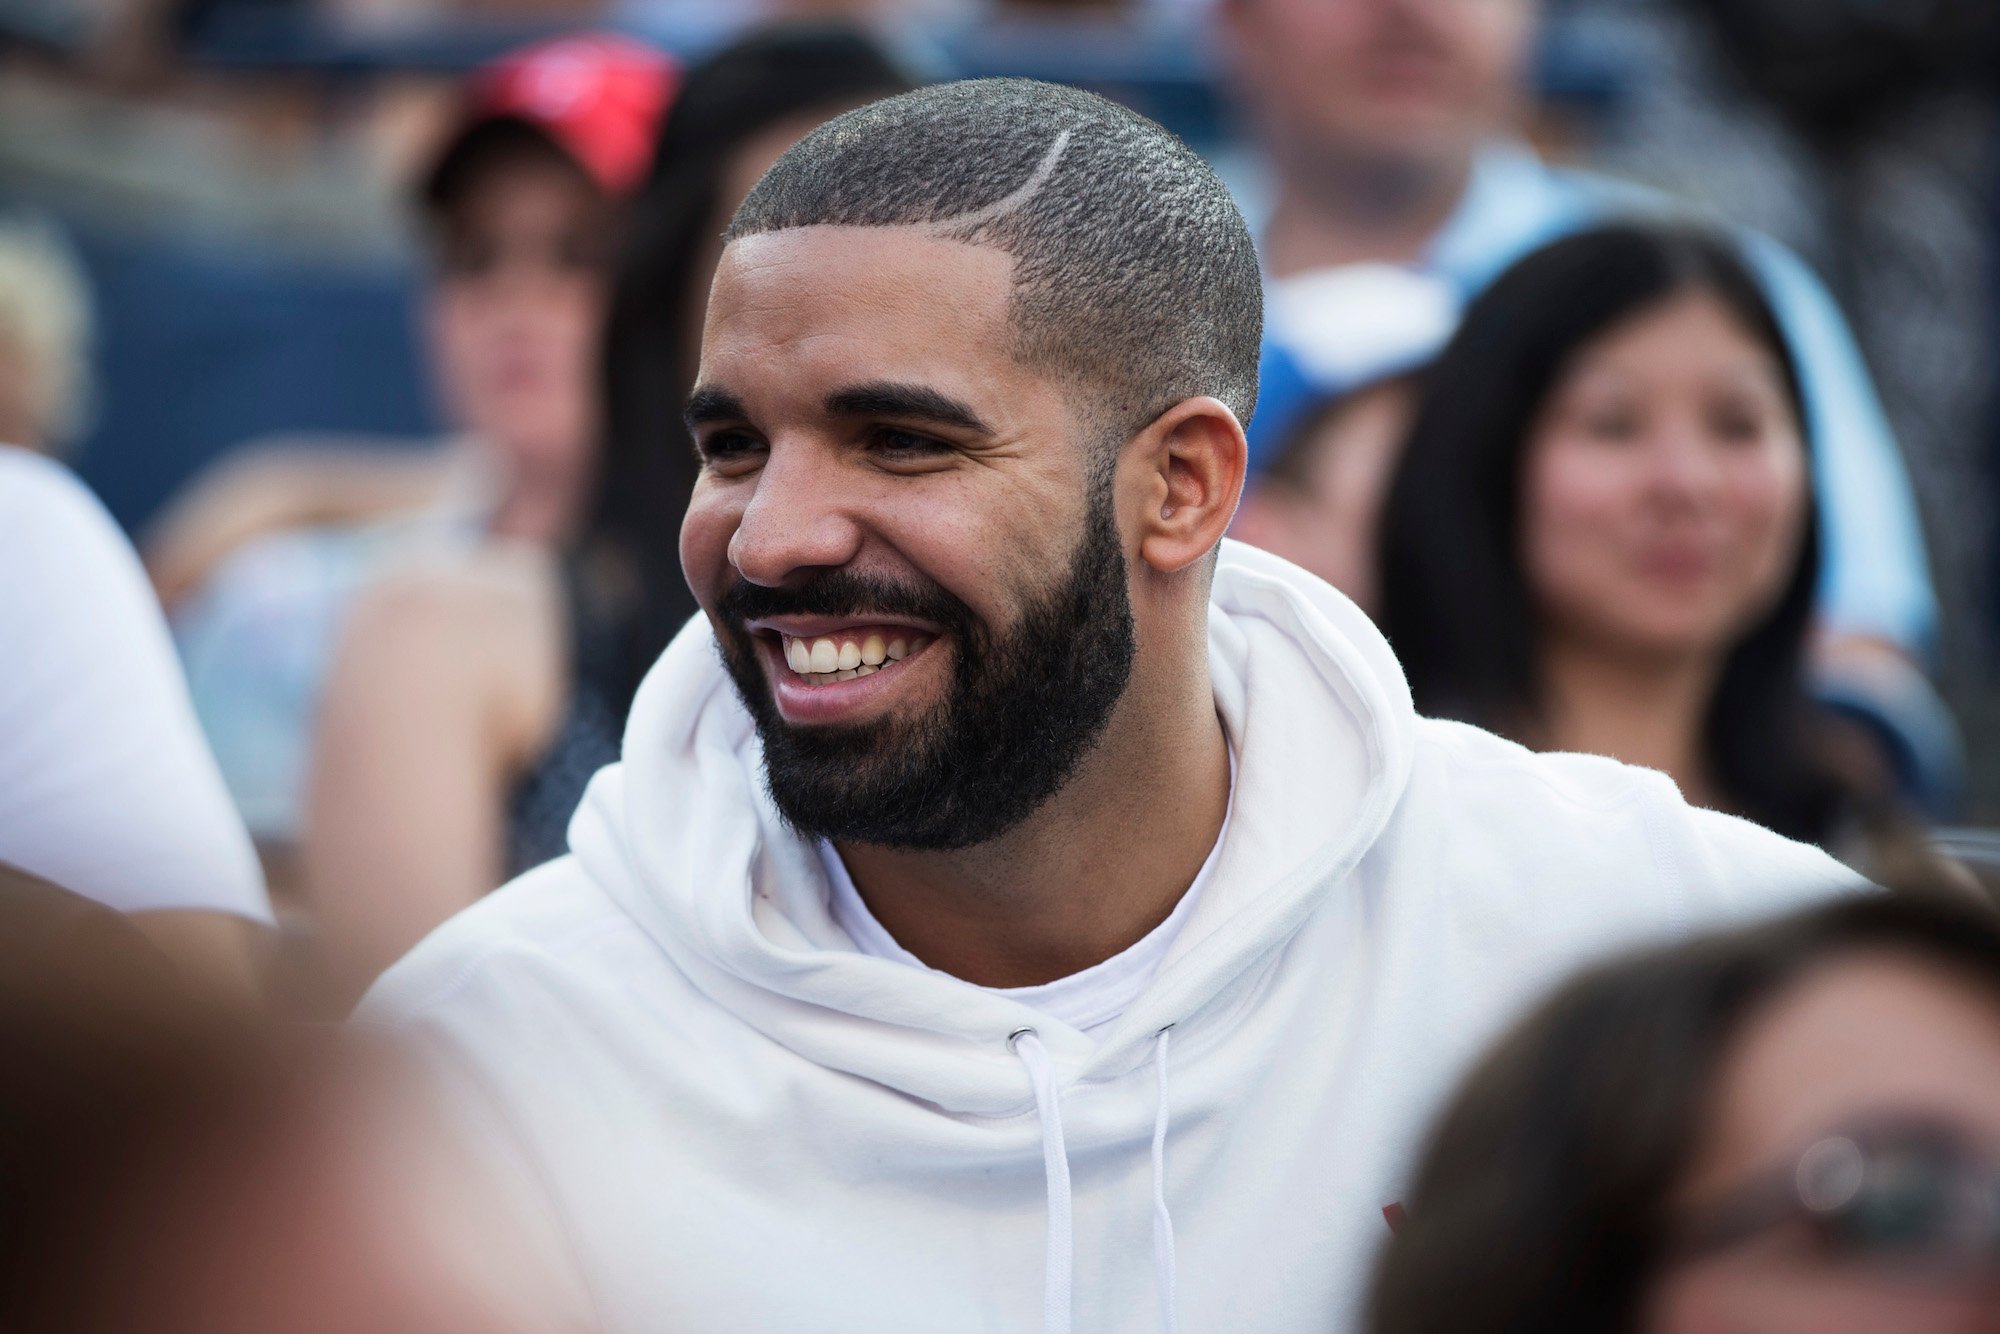 Drake, who has had 42 failed marriage proposals in the past, smiling for a photo